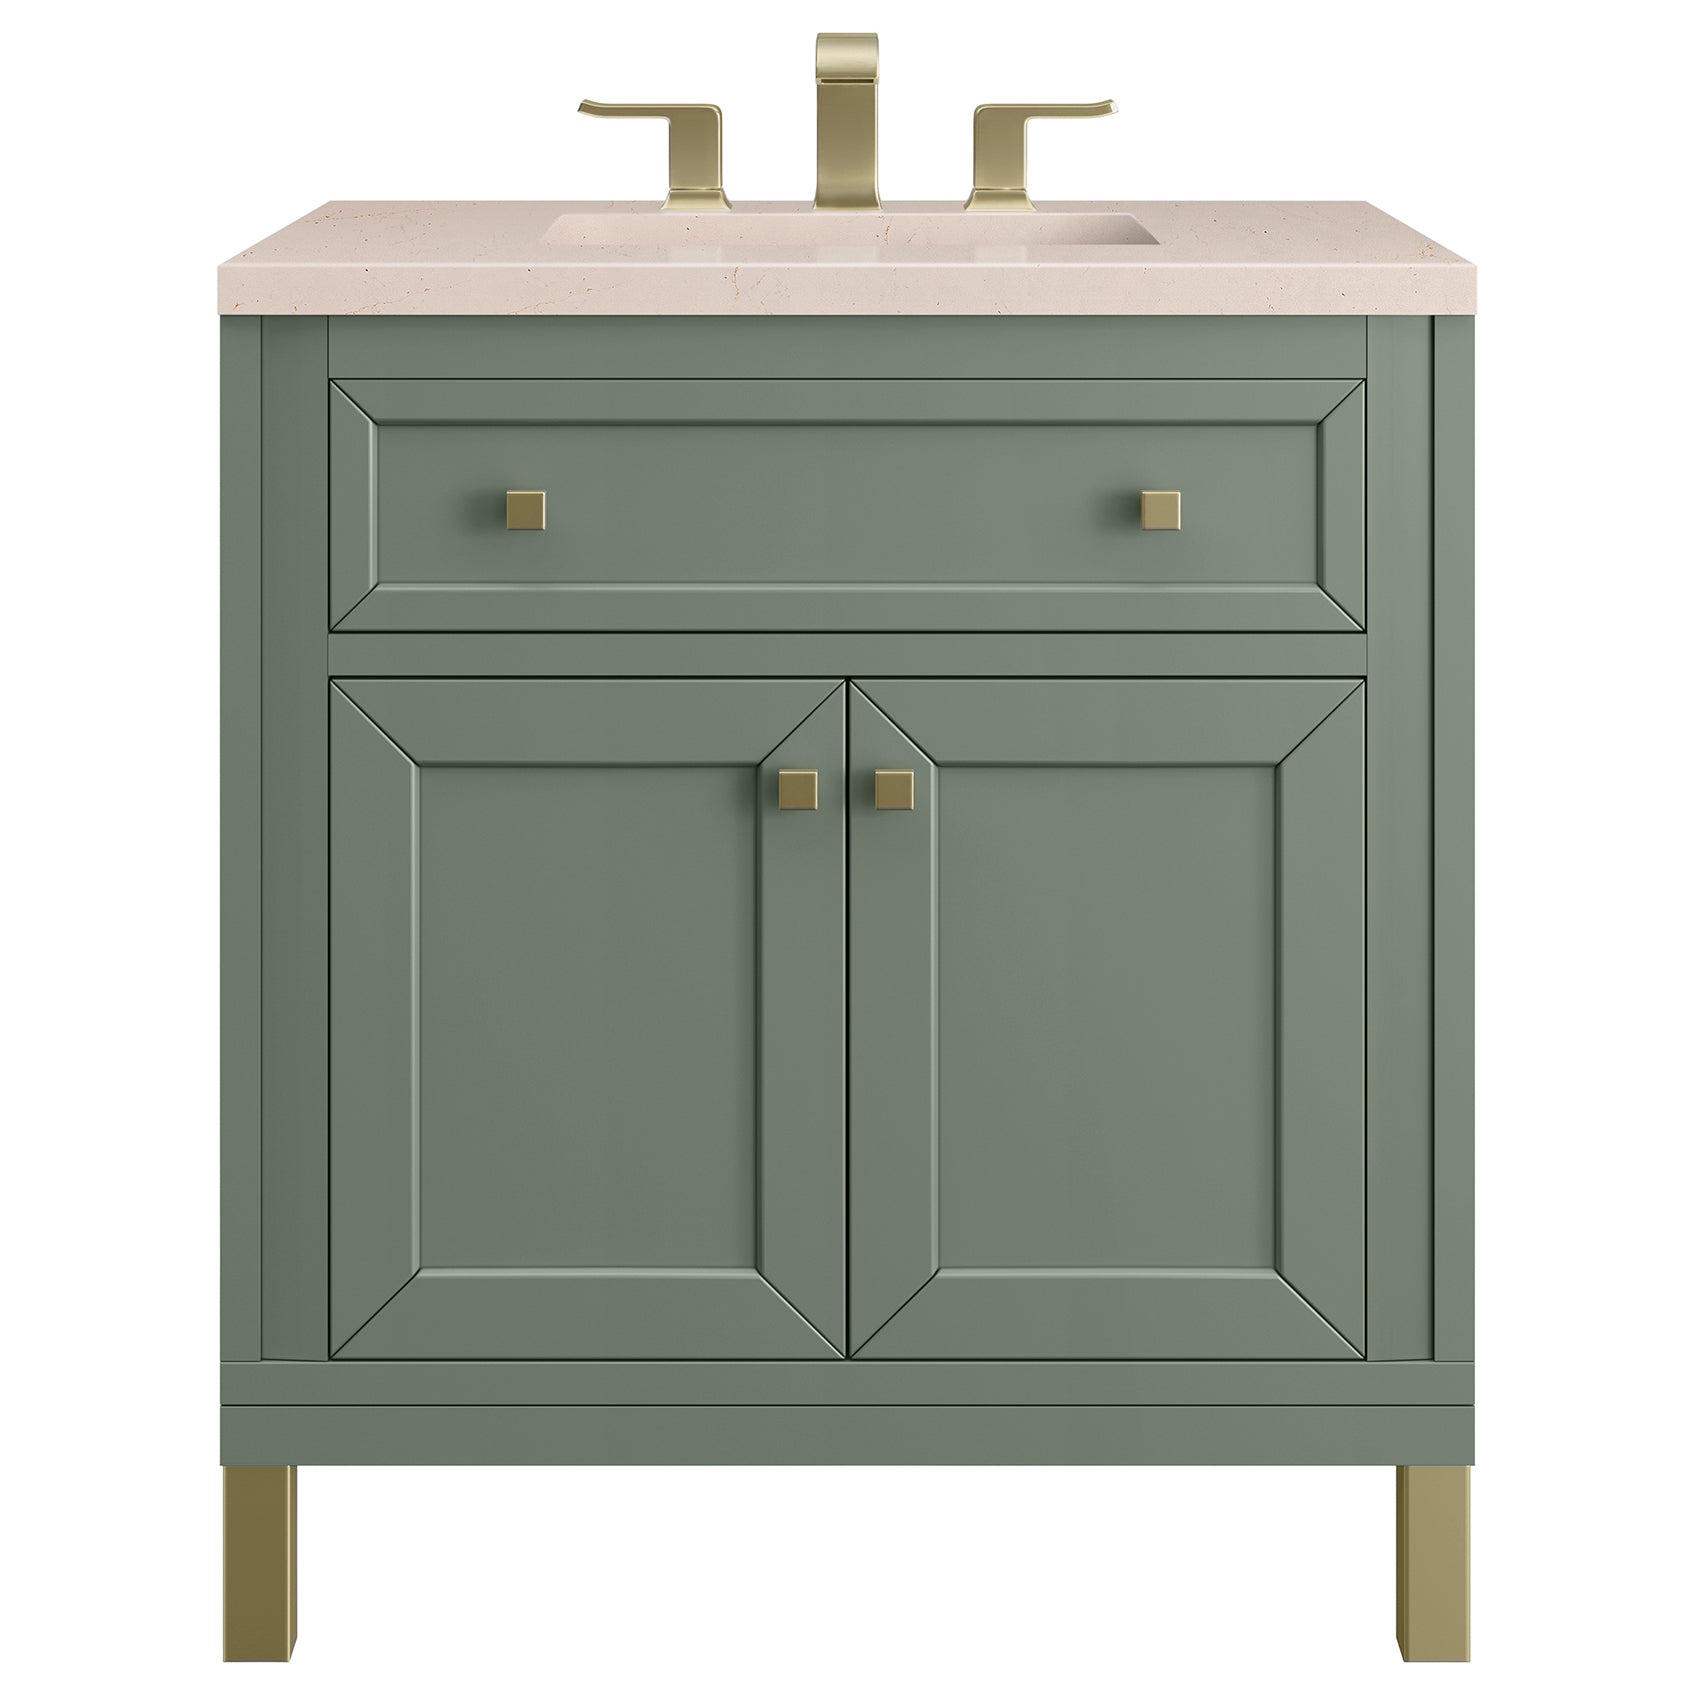 James Martin Vanities Chicago Collection 30 in. Single Vanity in Smokey Celadon with Countertop Options Eternal Marfil